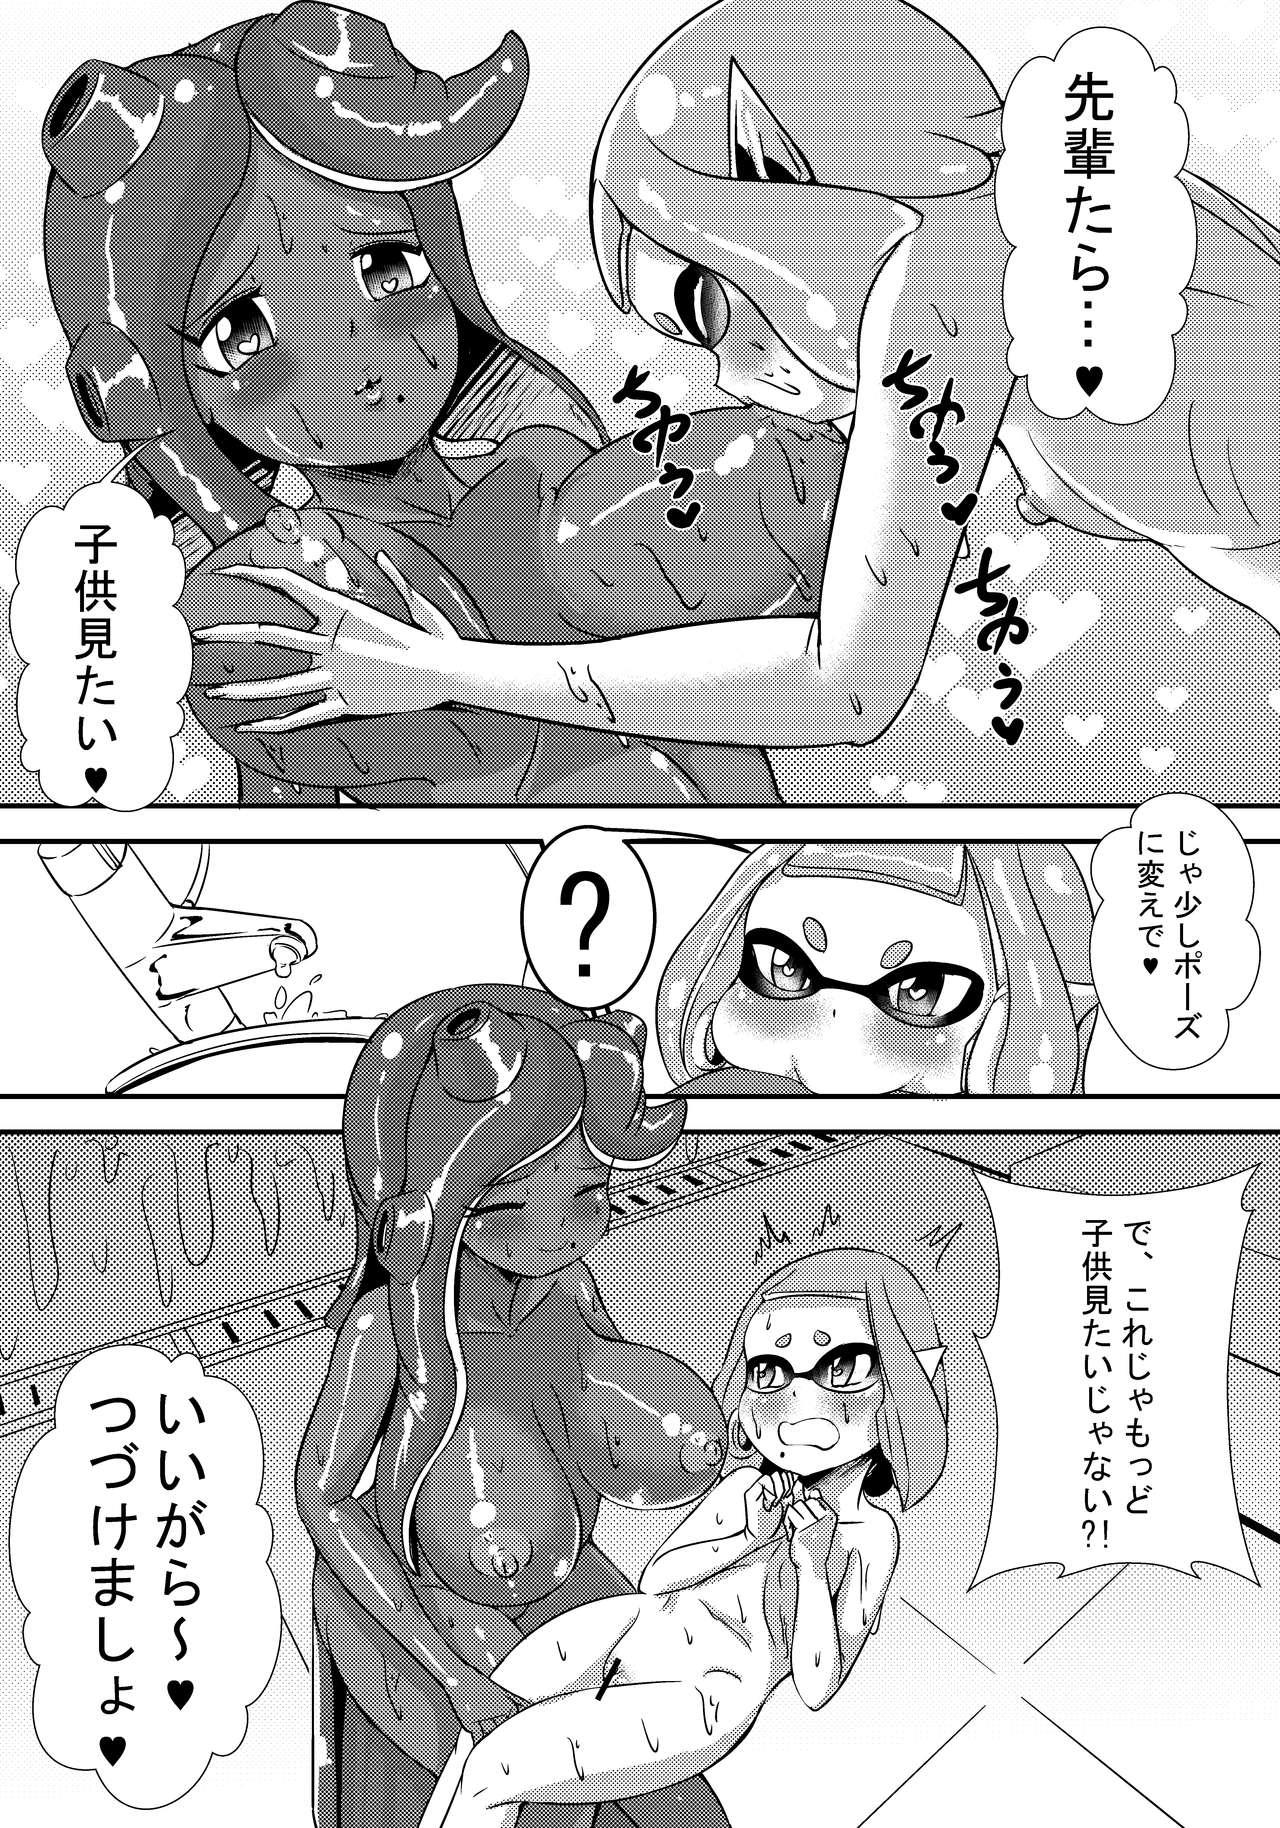 Gay Military Splat Double - Splatoon Camgirls - Page 7